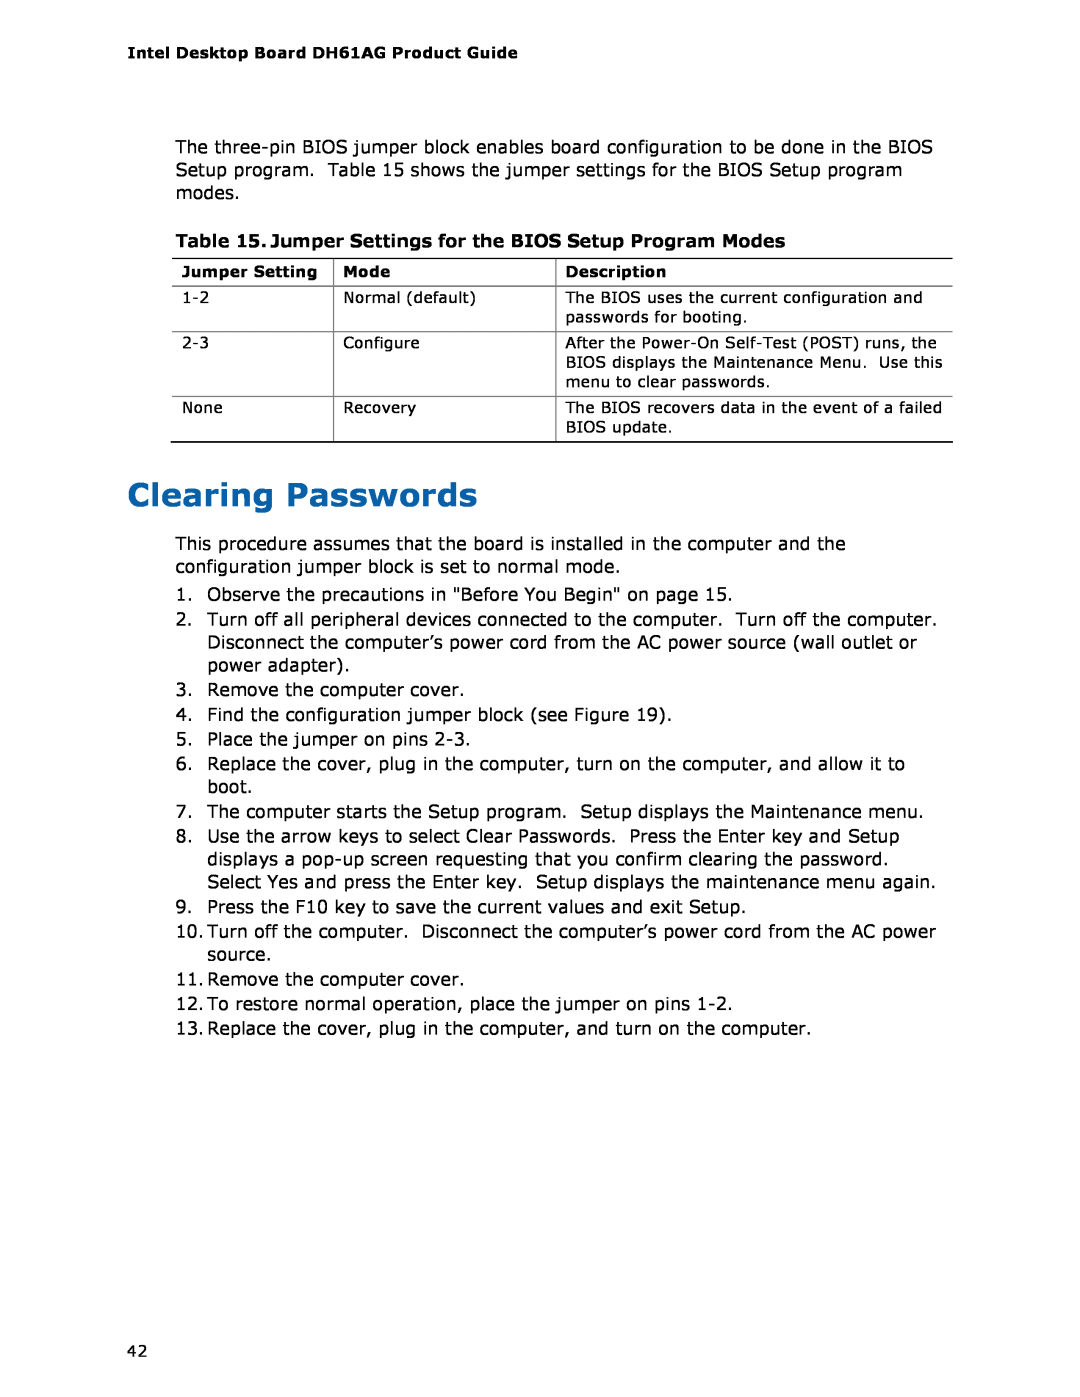 Intel BOXDH61AG manual Clearing Passwords, Jumper Settings for the BIOS Setup Program Modes 